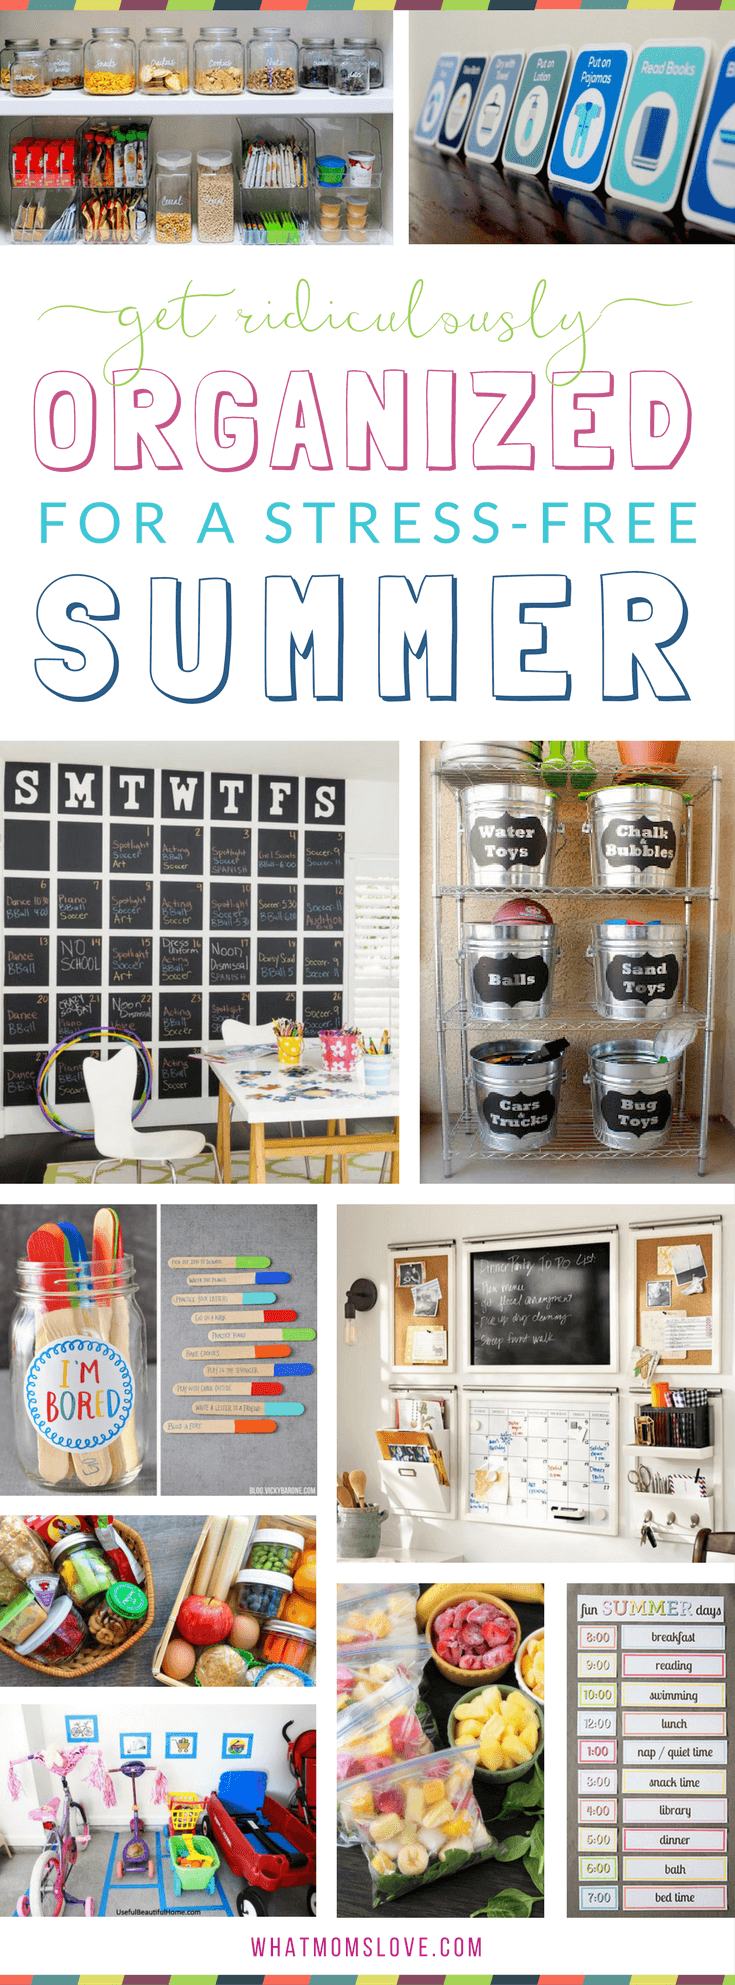 Organizational hacks, tips and tricks for a stress-free summer with your kids | How to organize your family's life for summer with smart ideas including summer schedule, morning and nighttime routine and chore charts, calendar planning, fun things to do when kids get bored (like an "I'm bored jar"!), DIY ways to organize your garage, snack prep tips and more!